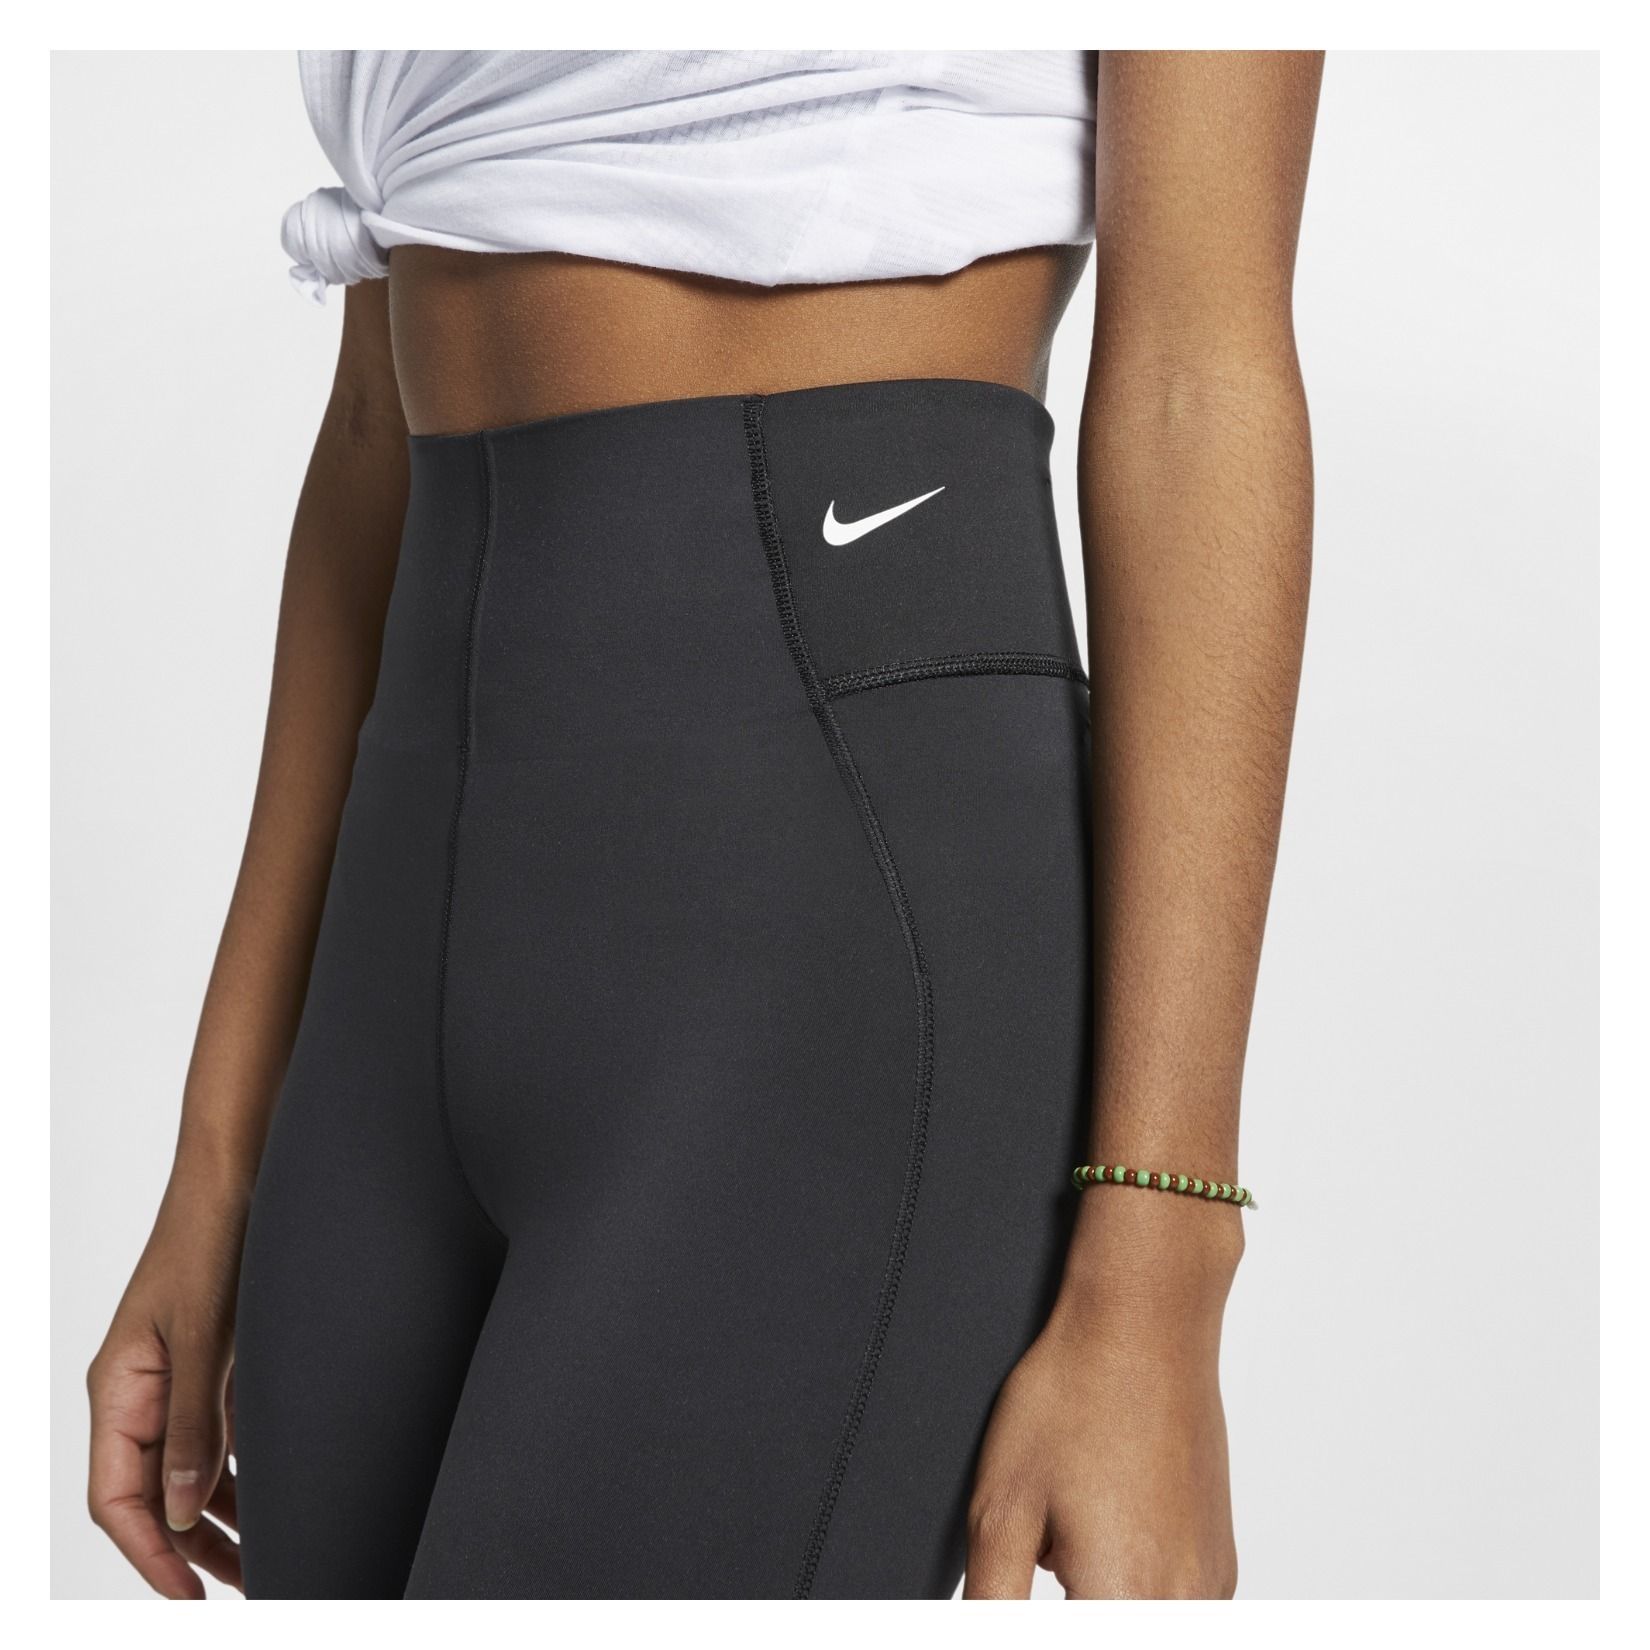 the nike sculpt victory tight fit